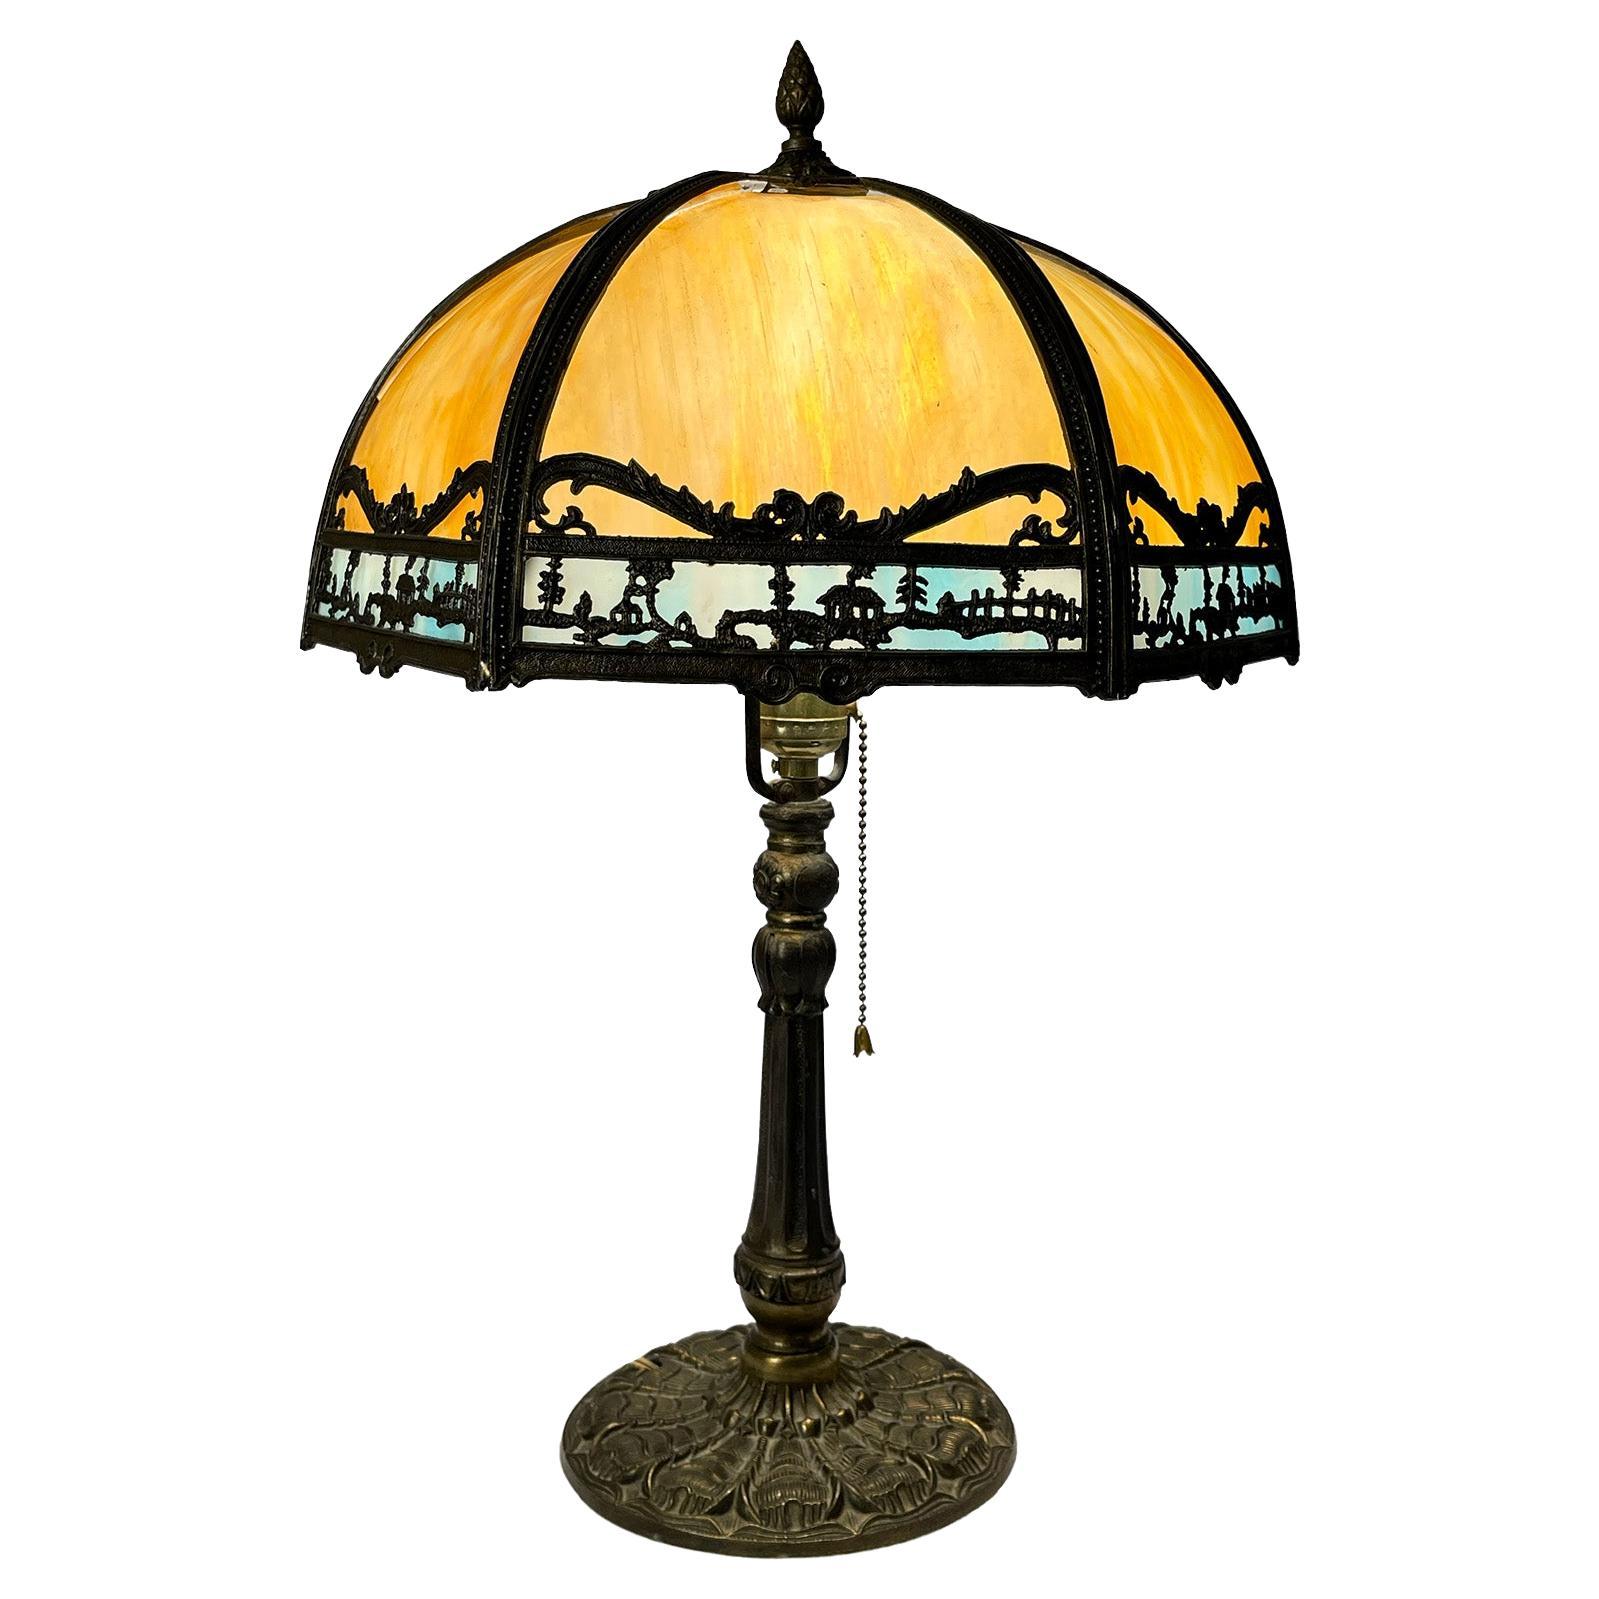 Early 20th Century Art Nouveau Table Lamp with Cottage Scene Motif For Sale